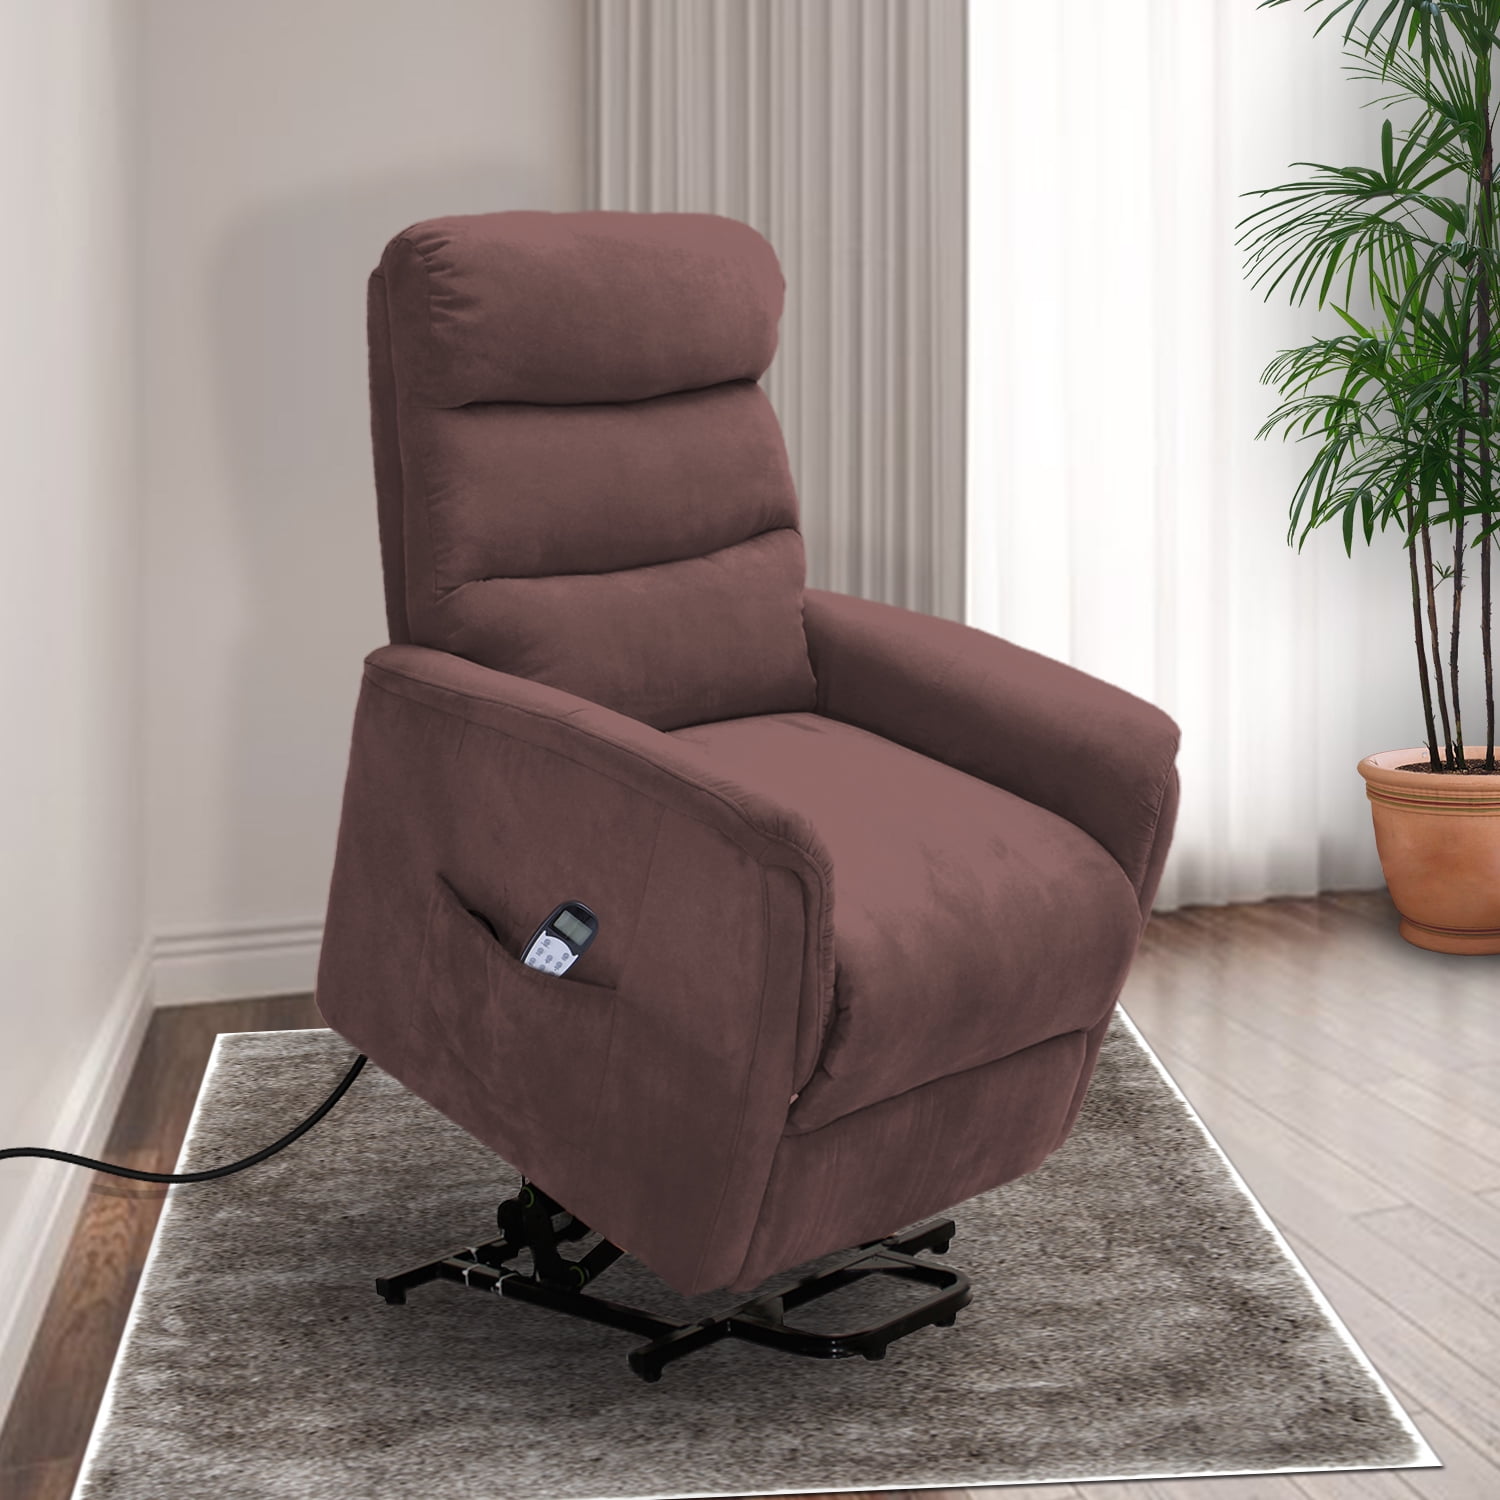 Lifesmart Ultra Comfort Lift Chair with Heat, Massage and